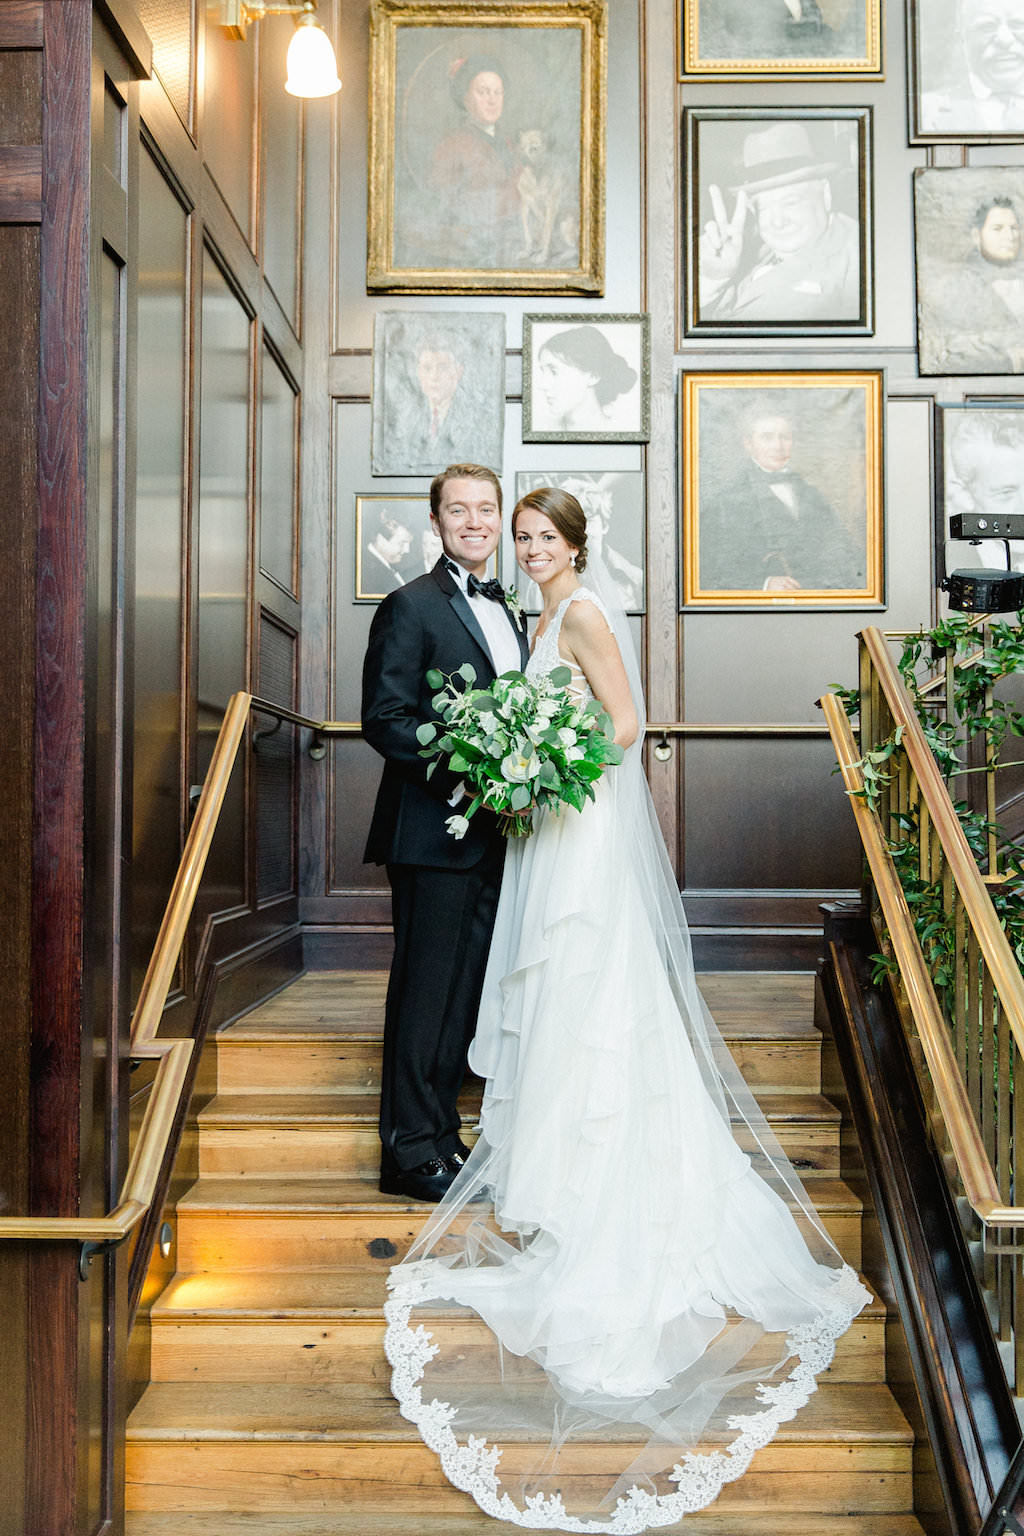 Indoor Wedding Portrait on Staircase with Greenery Bouquet , Bride in V Neck Lace Hayley Paige Dress, Groom in Black Tuxedo | Tampa Wedding Photographer Ailyn La Torre Photography | Downtown Historic Venue The Oxford Exchange